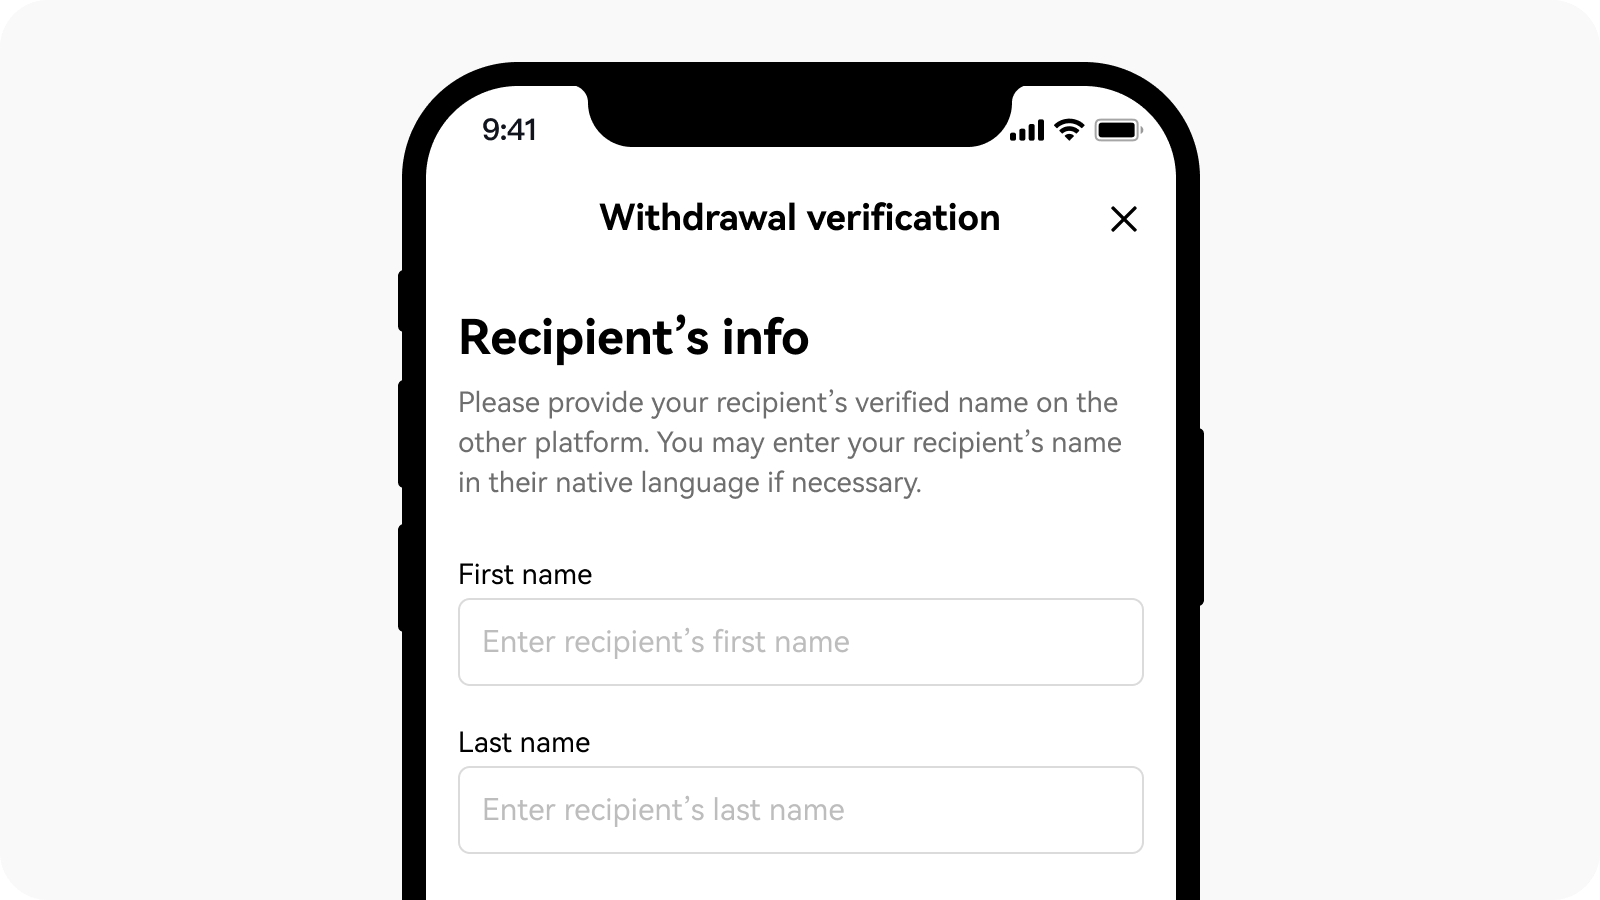 CT-app-crypto withdrawal-travel rule